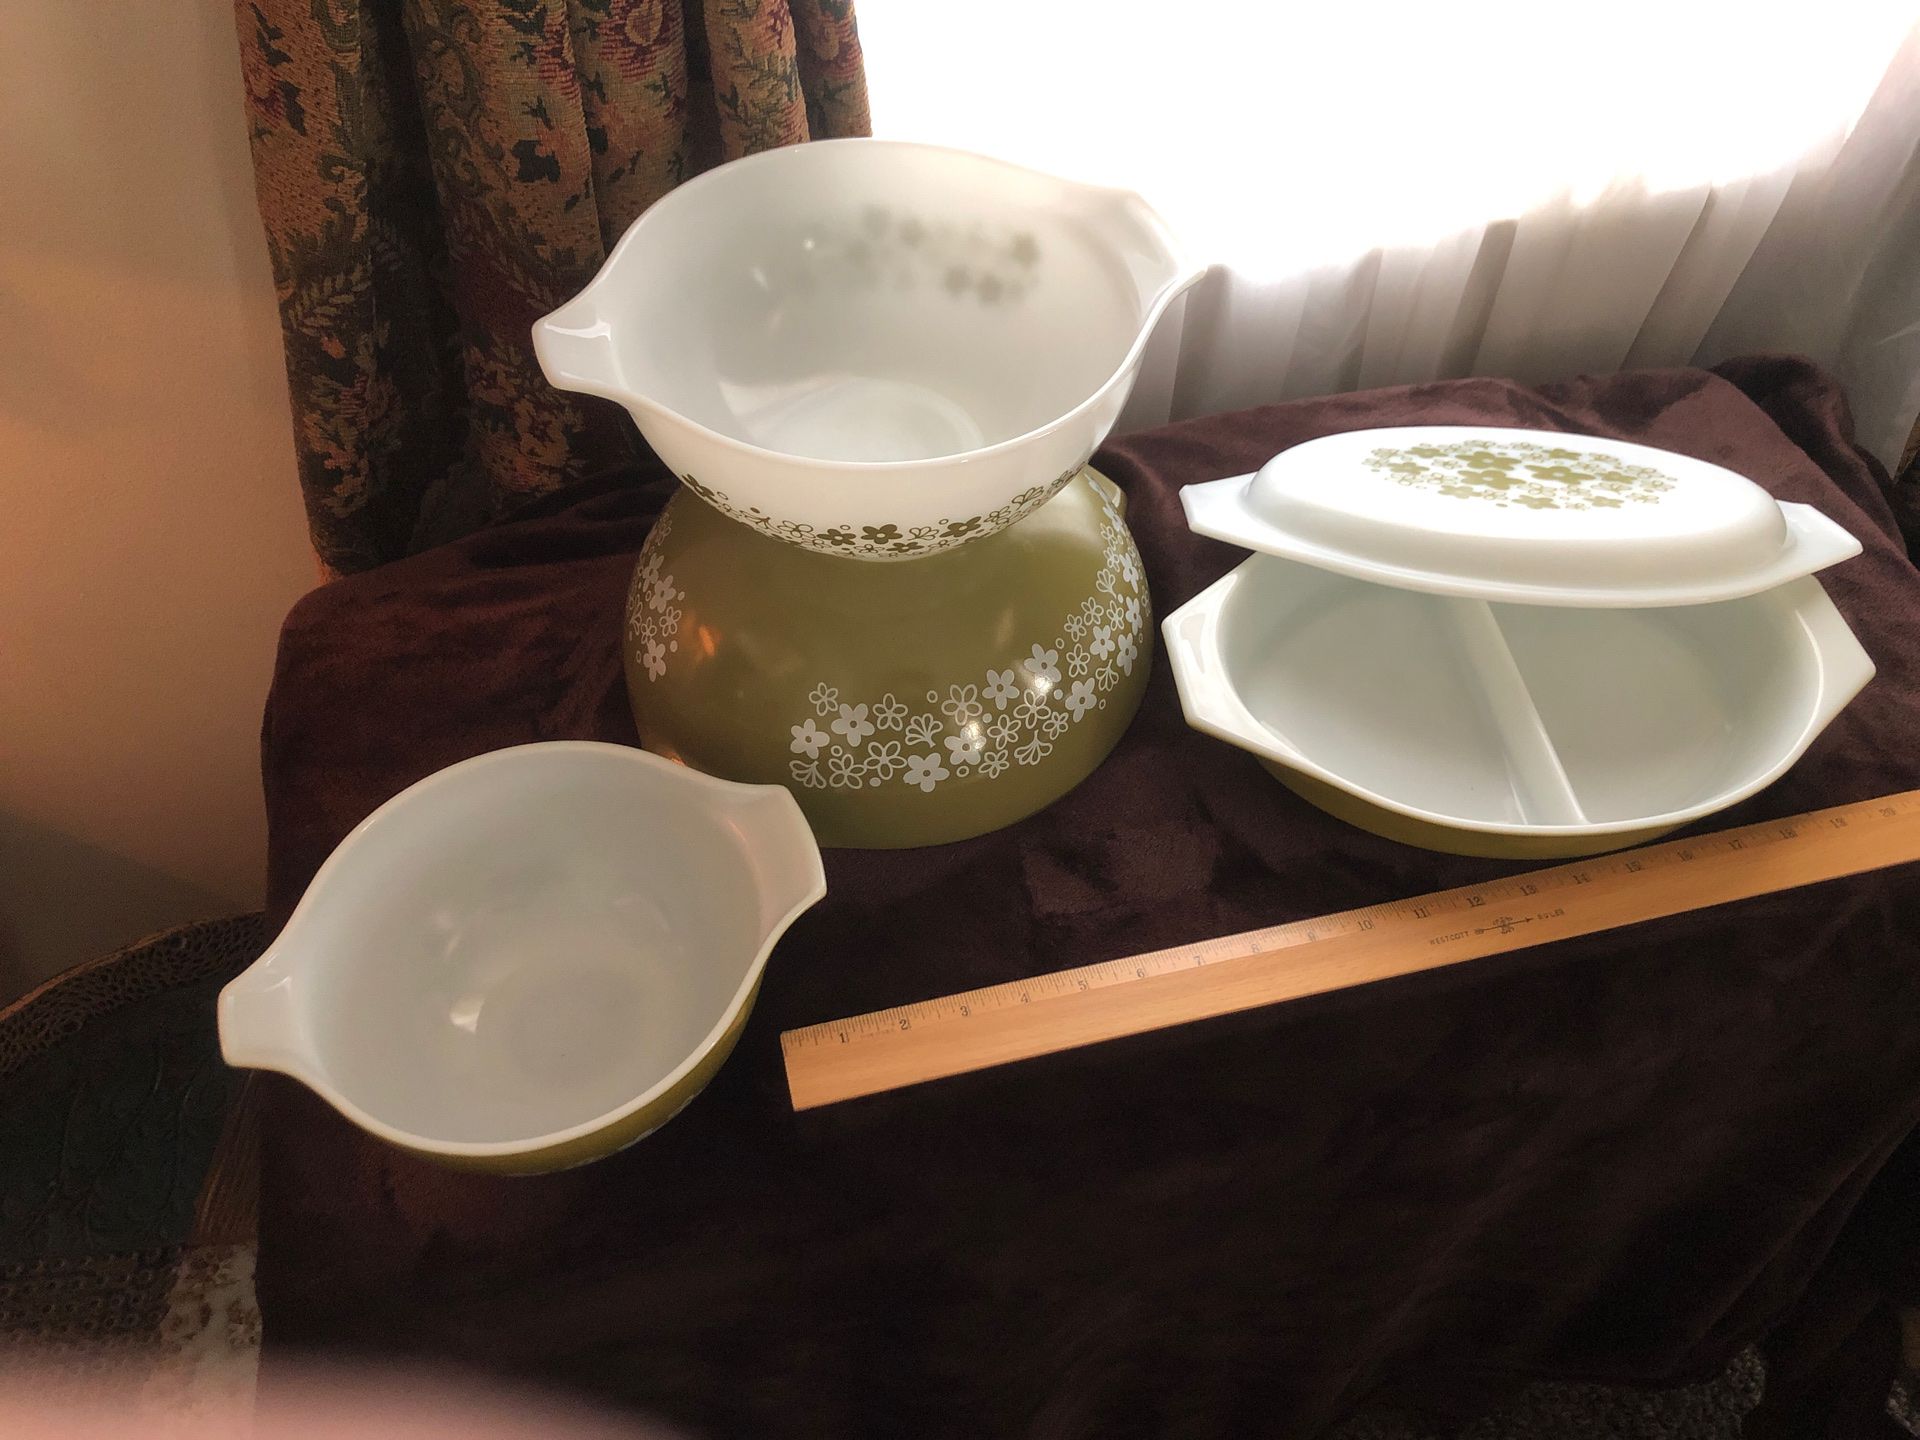 Pyrex set of bowls and 2 section dish with lid